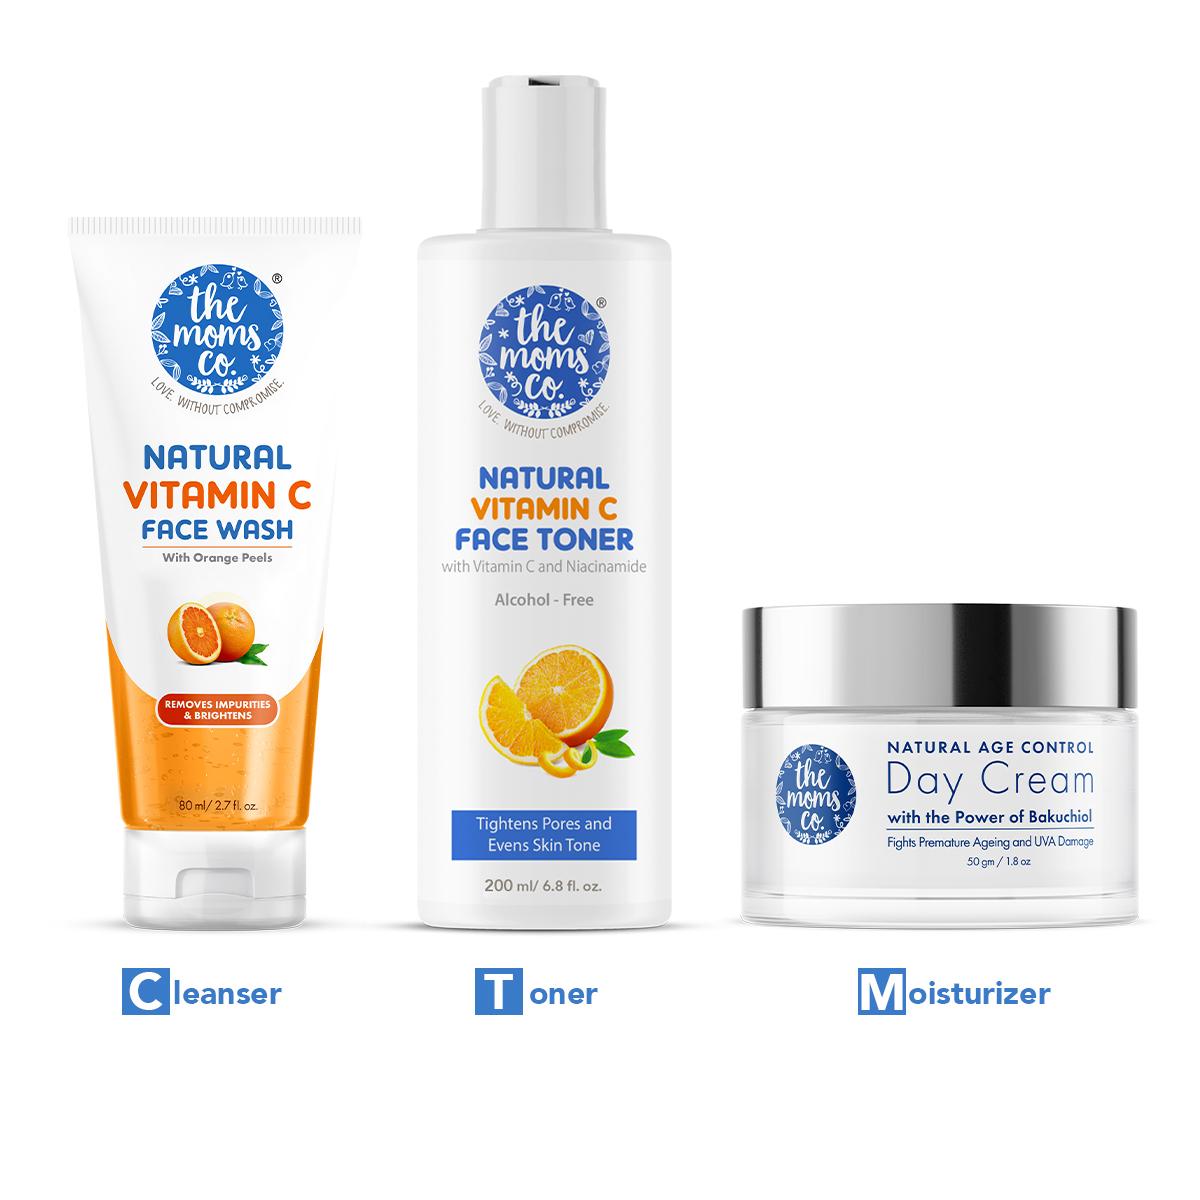 The Mom's Co. | The Mom's Co. Natural Daily Ctm Re Gime Kit Cleansing, Toning & Moisturizing Combo Kit